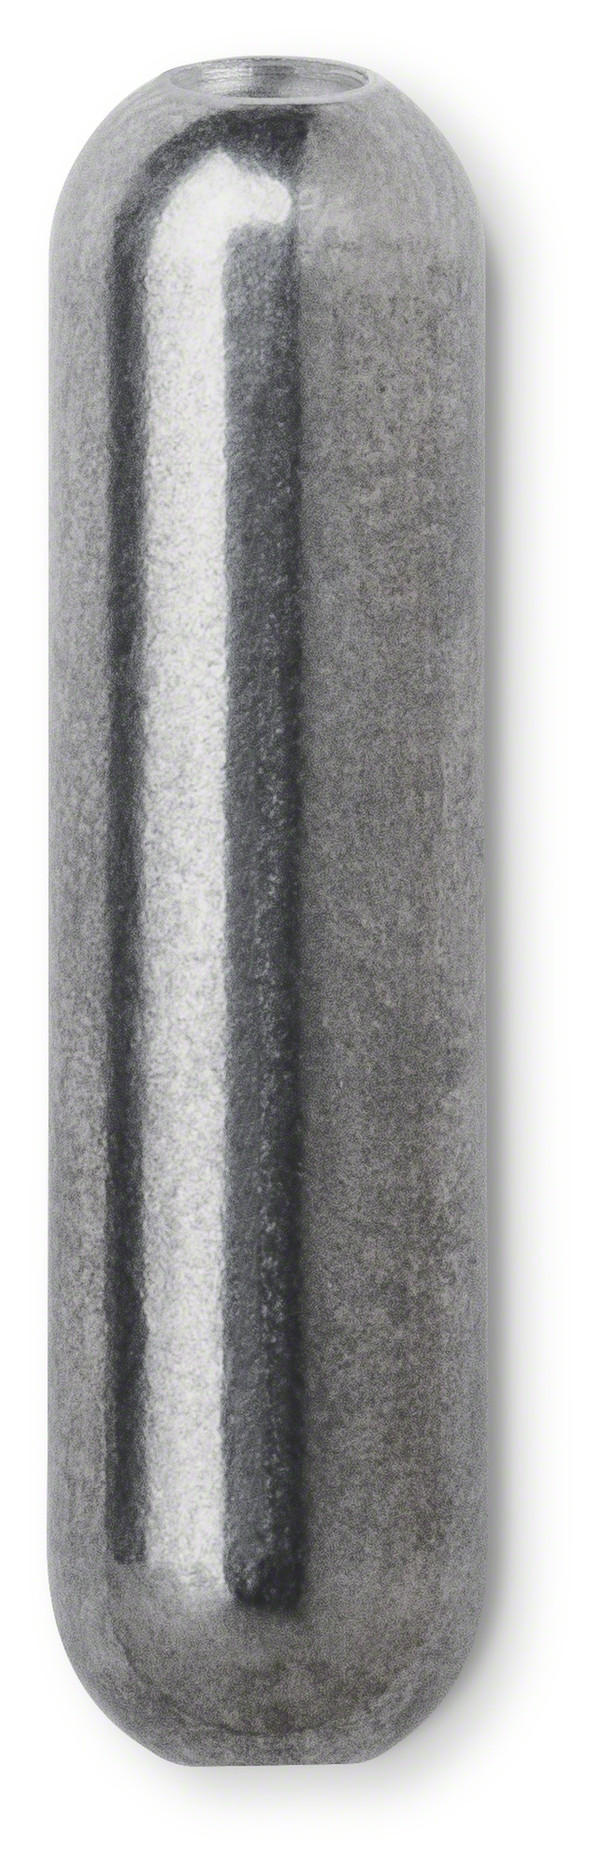 br-0292-0898